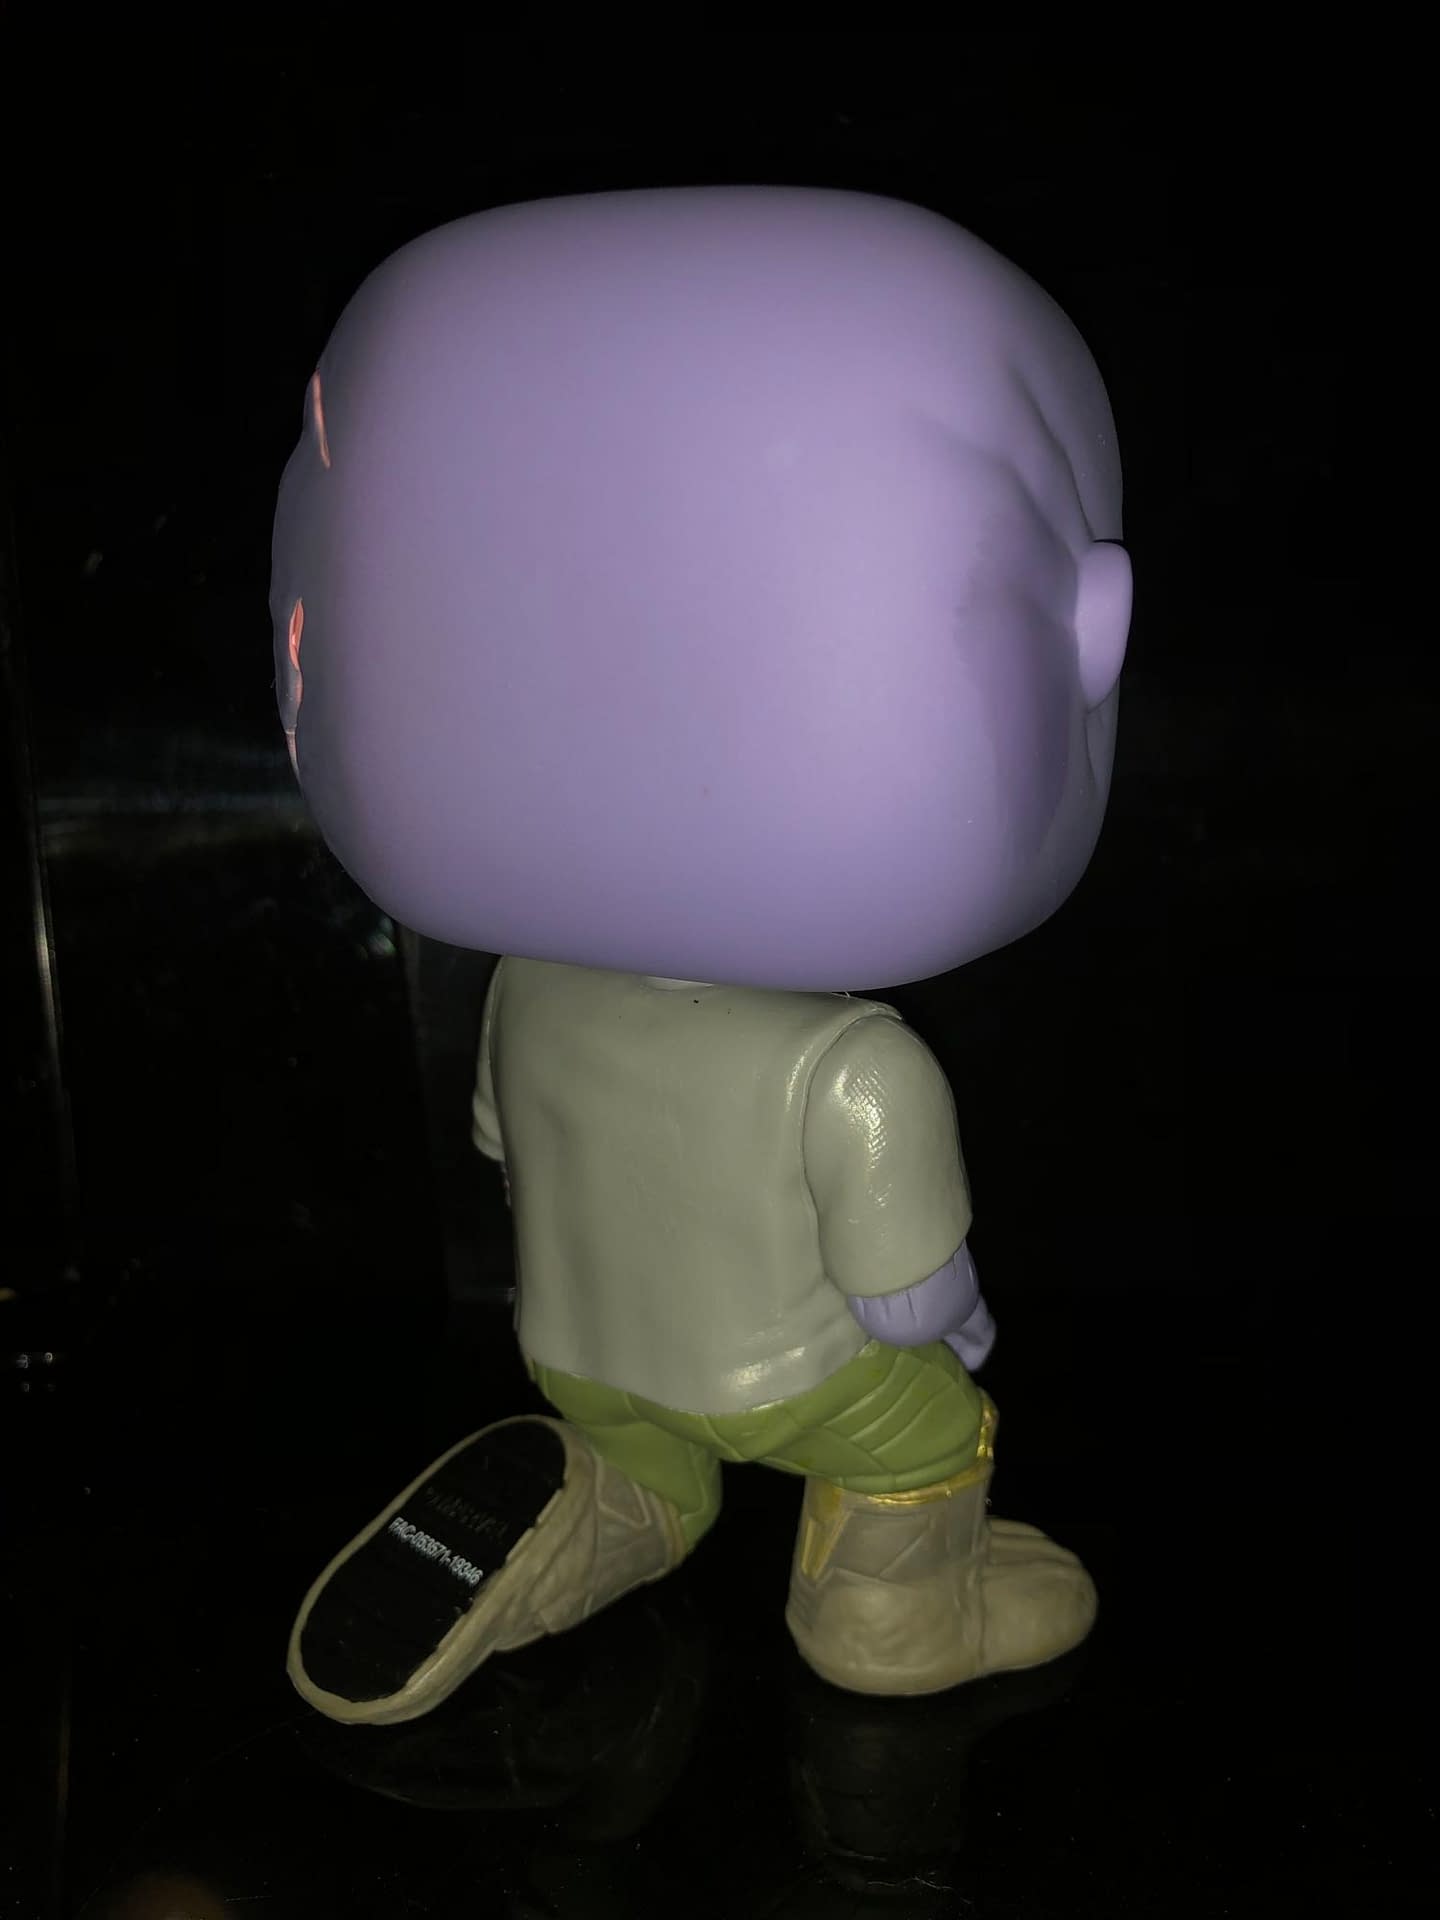 Thanos Gets a New Funko Pop for Emerald City and We Love It!